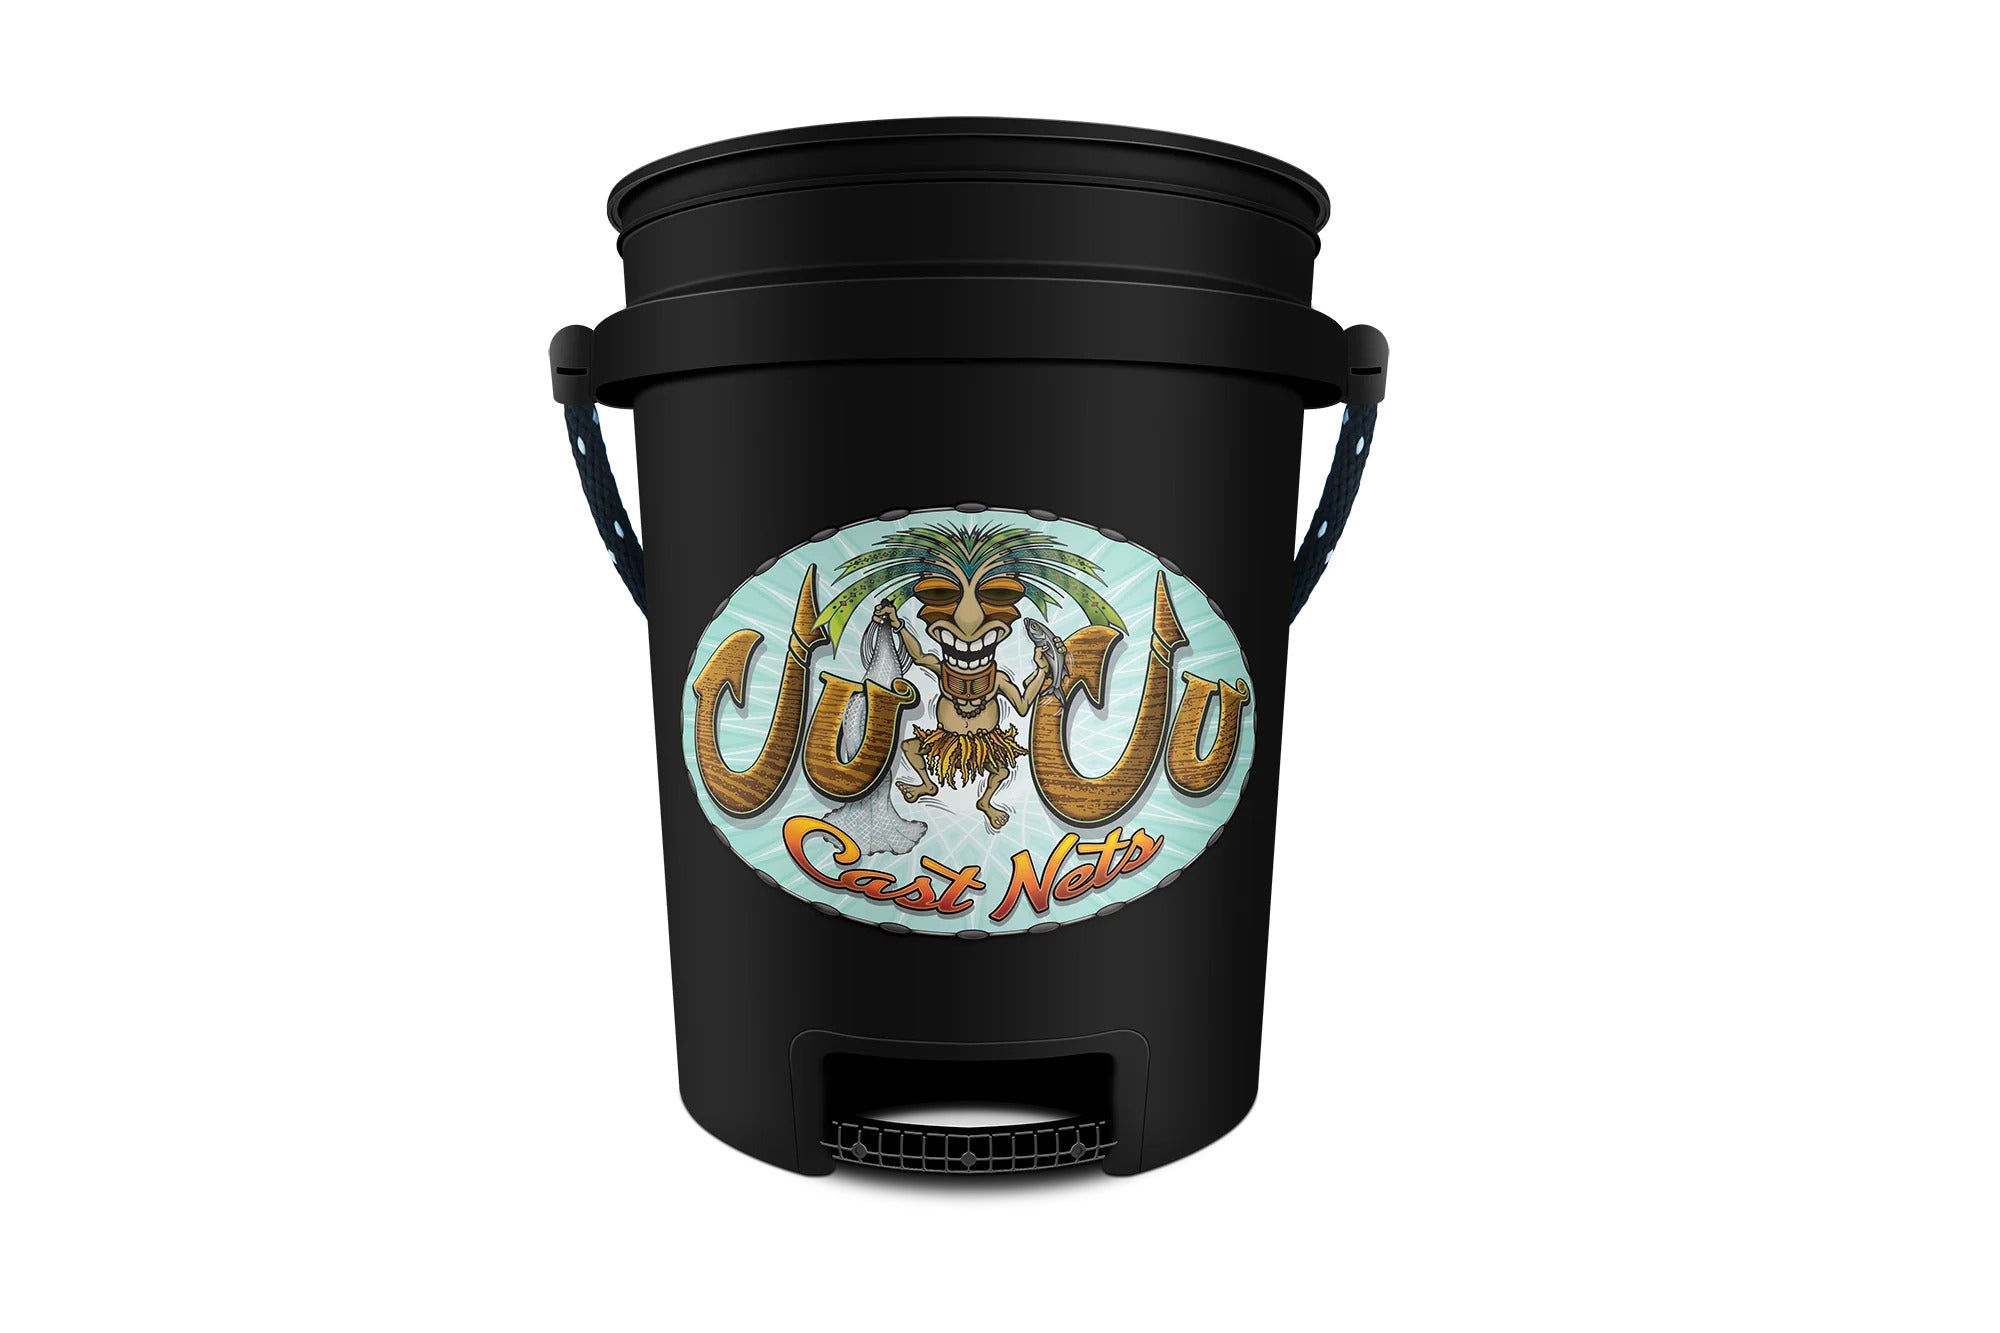 Personalized Fishing Bucket Seat - Reel Cool Dad - 3.5 Gallon